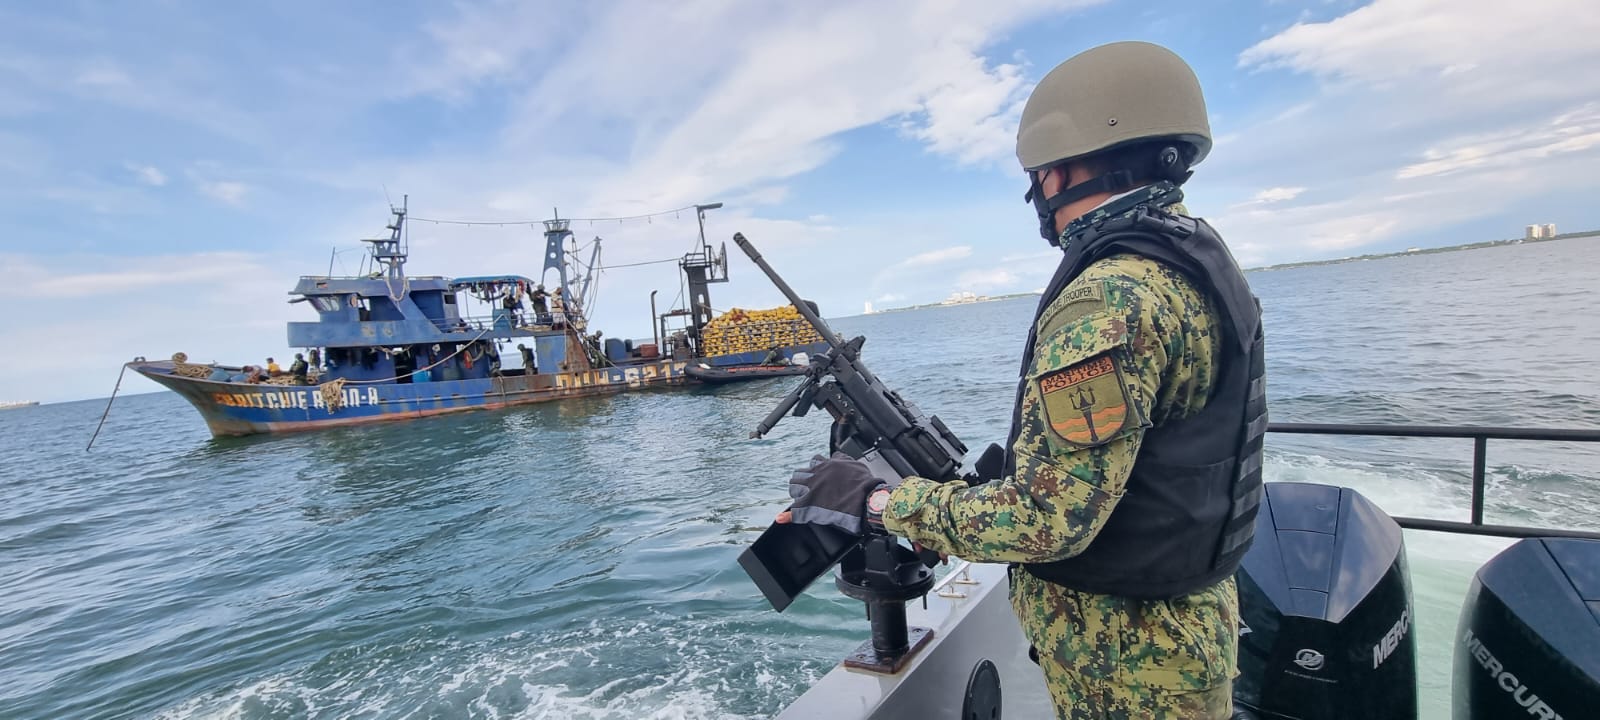 <p>Member of the Philippine National Police-Maritime Group during the “Visit Board Search and Seizure” simulating a maritime law enforcement operation © Mr. Erick Tran</p>